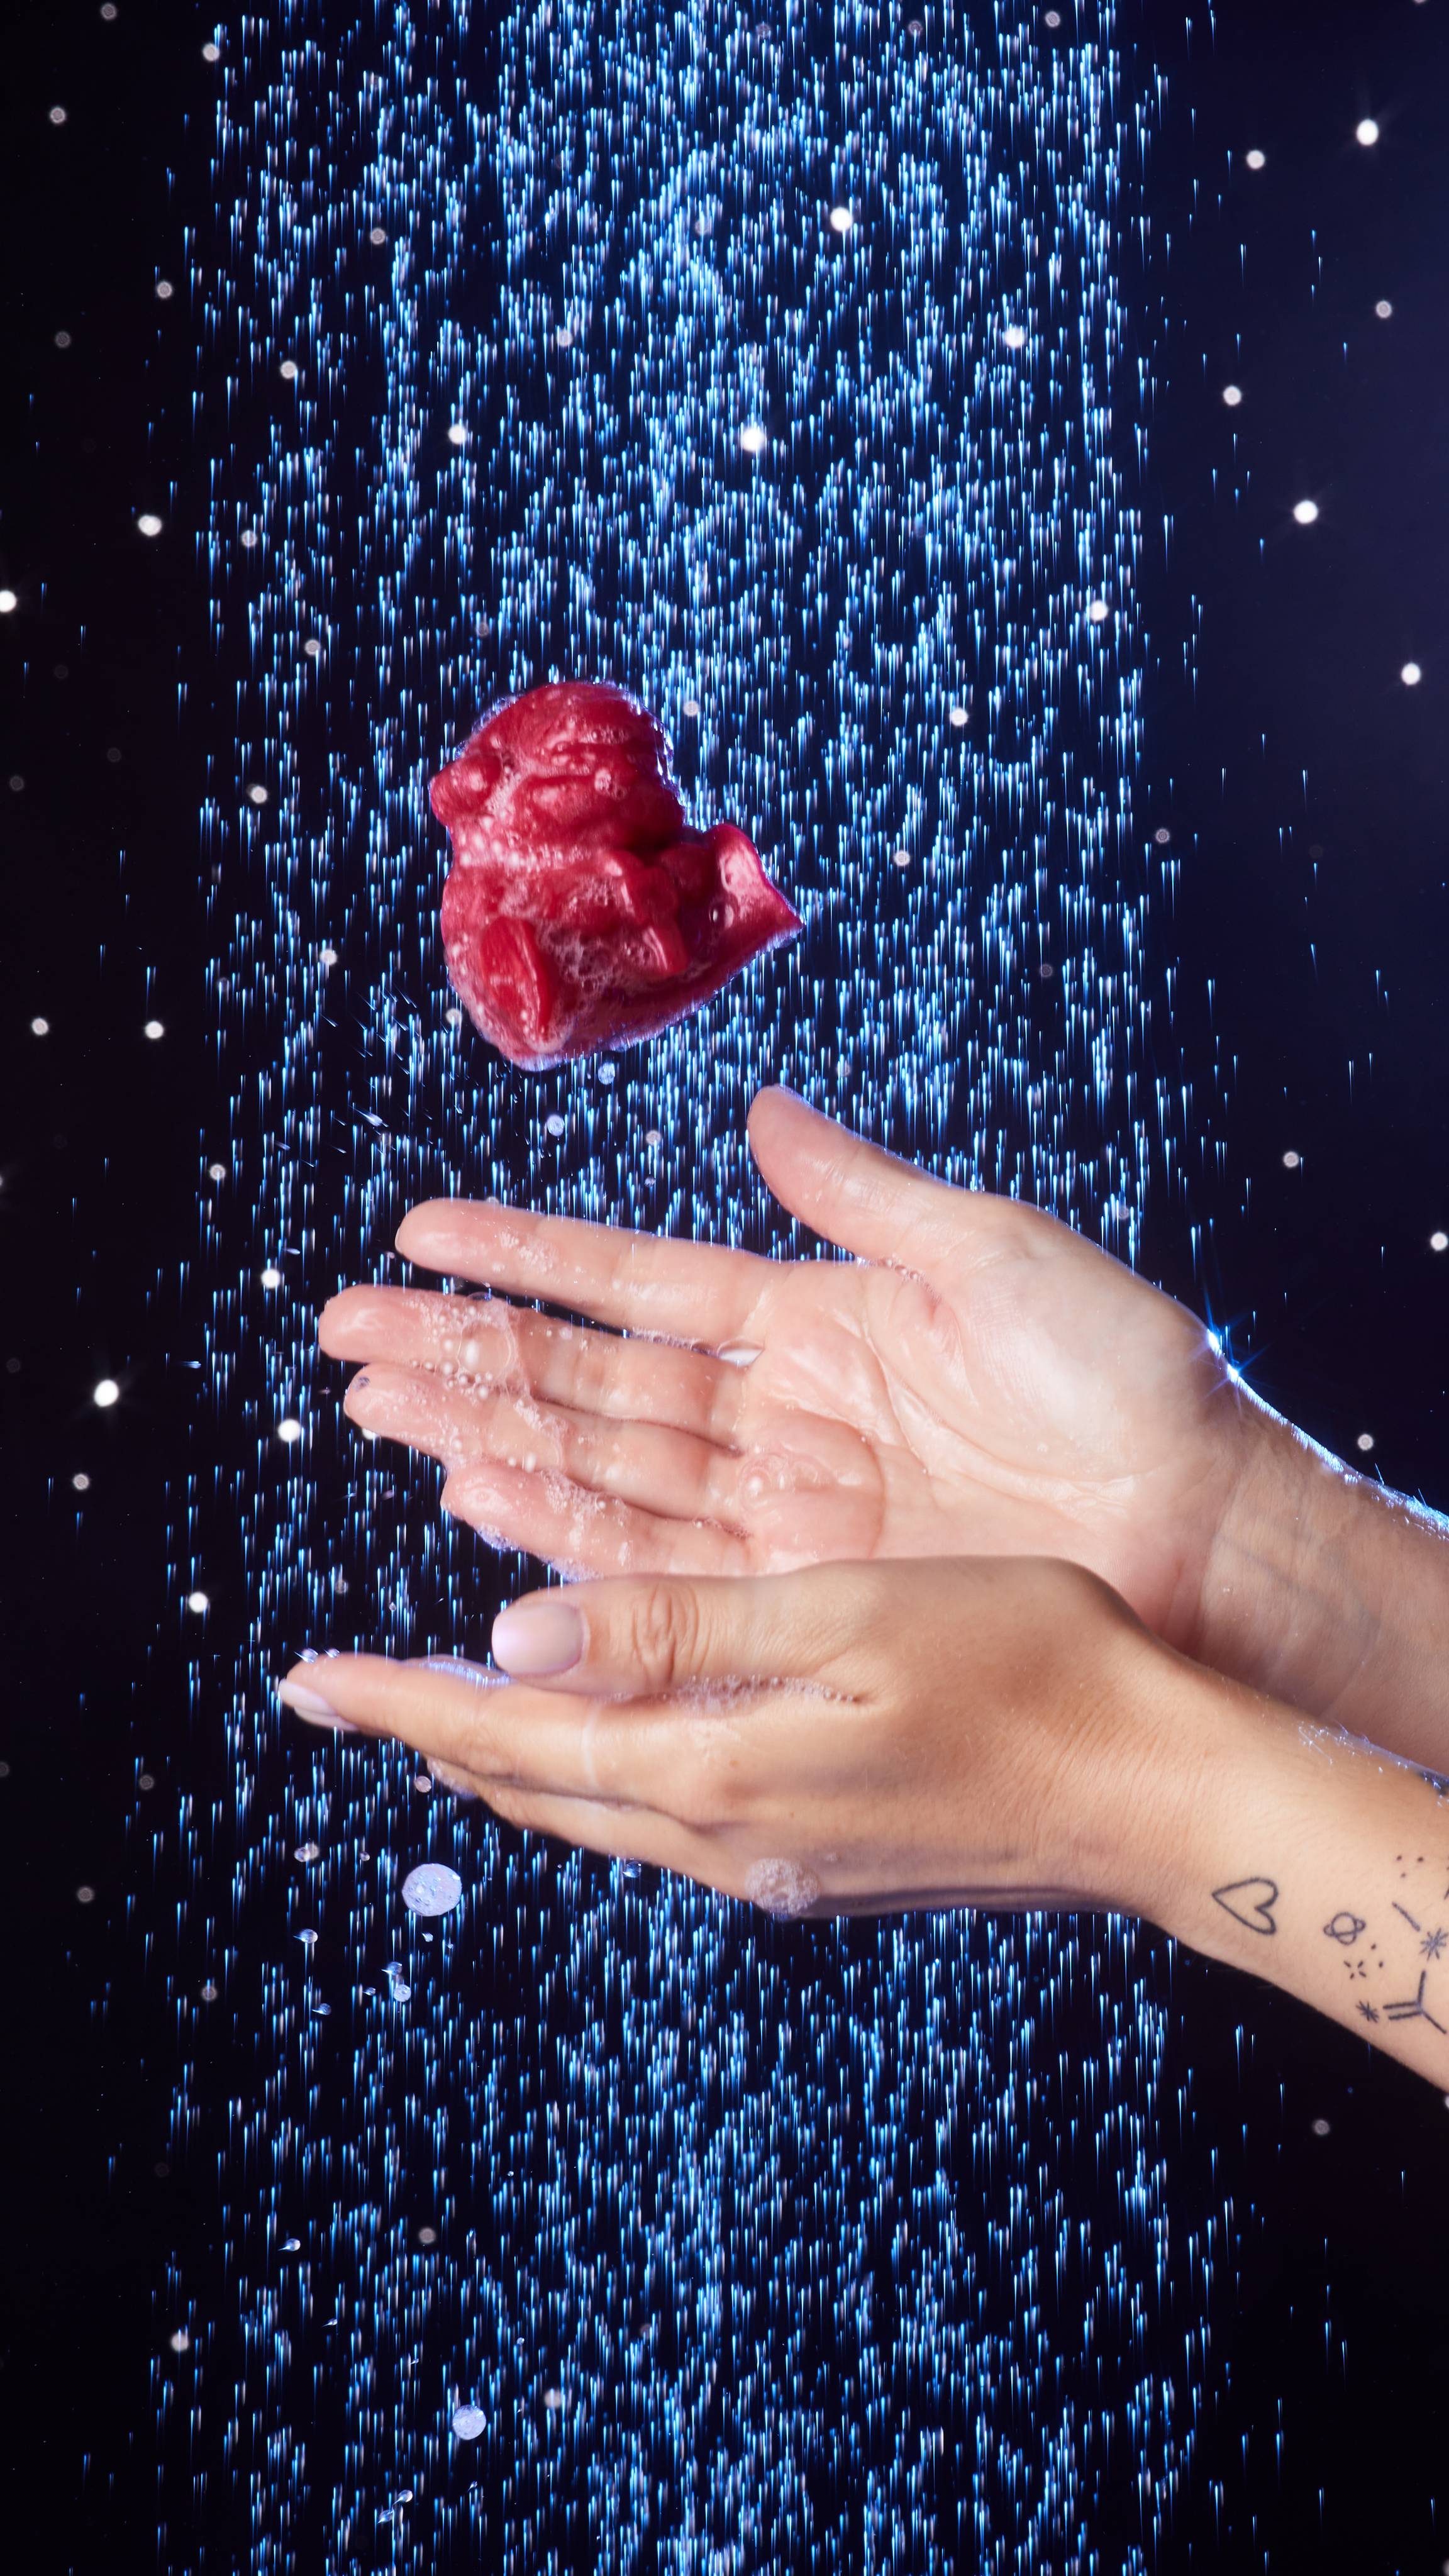 Image shows the model's hands under shower water, lathered in bubbles as they have just thrown the Bouncing Santa in the air. 